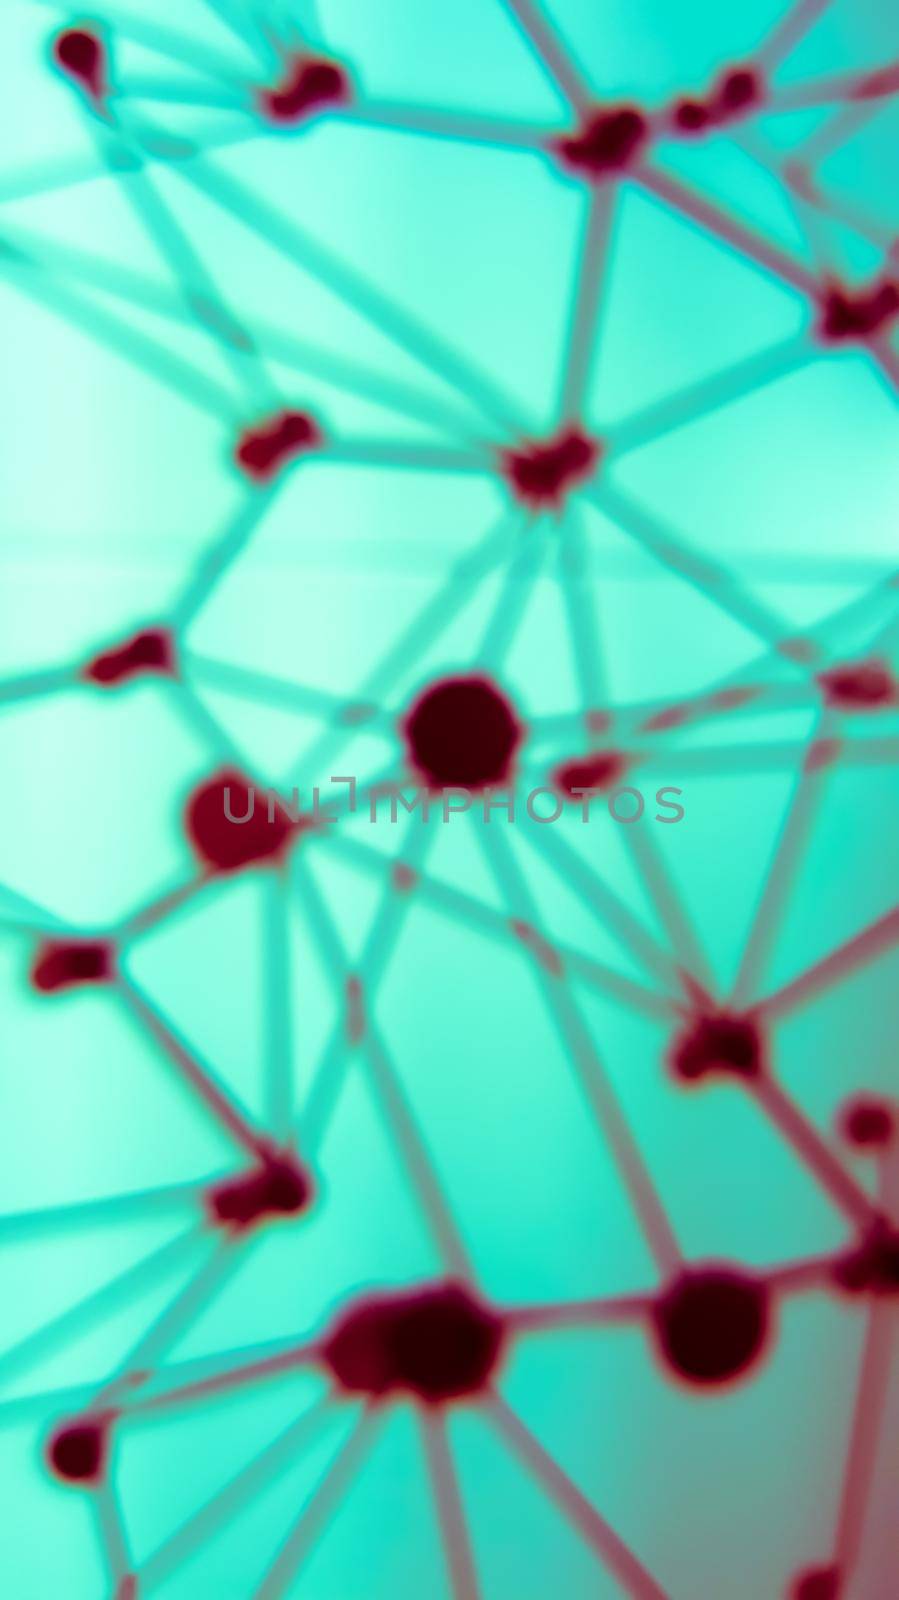 Blur background of sphere network structure. Connection abstract design.